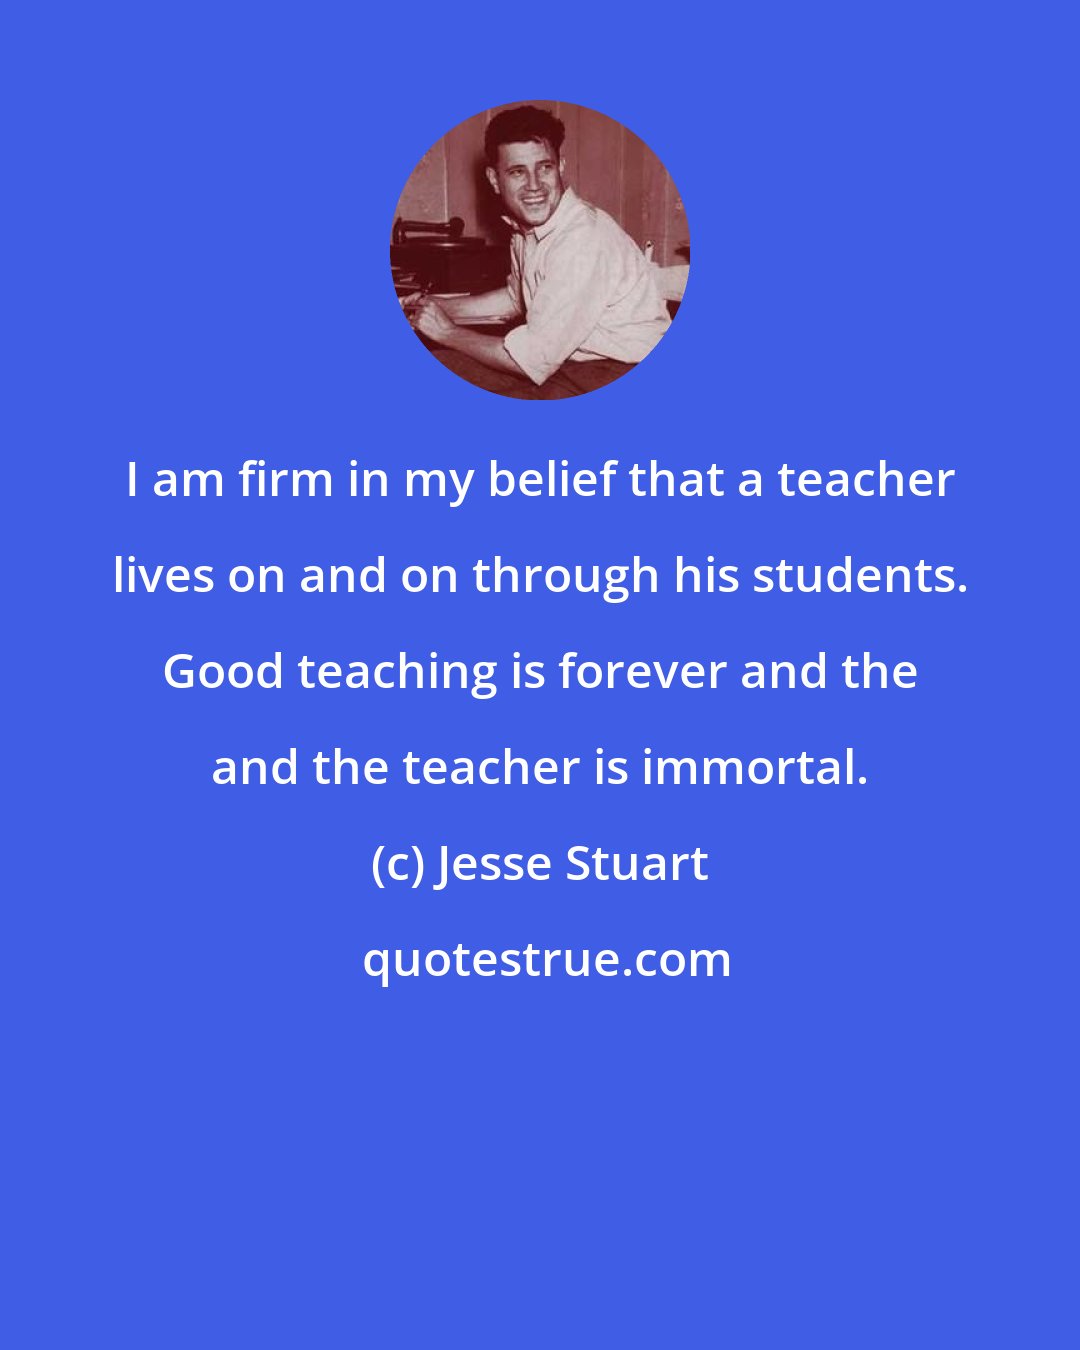 Jesse Stuart: I am firm in my belief that a teacher lives on and on through his students. Good teaching is forever and the and the teacher is immortal.